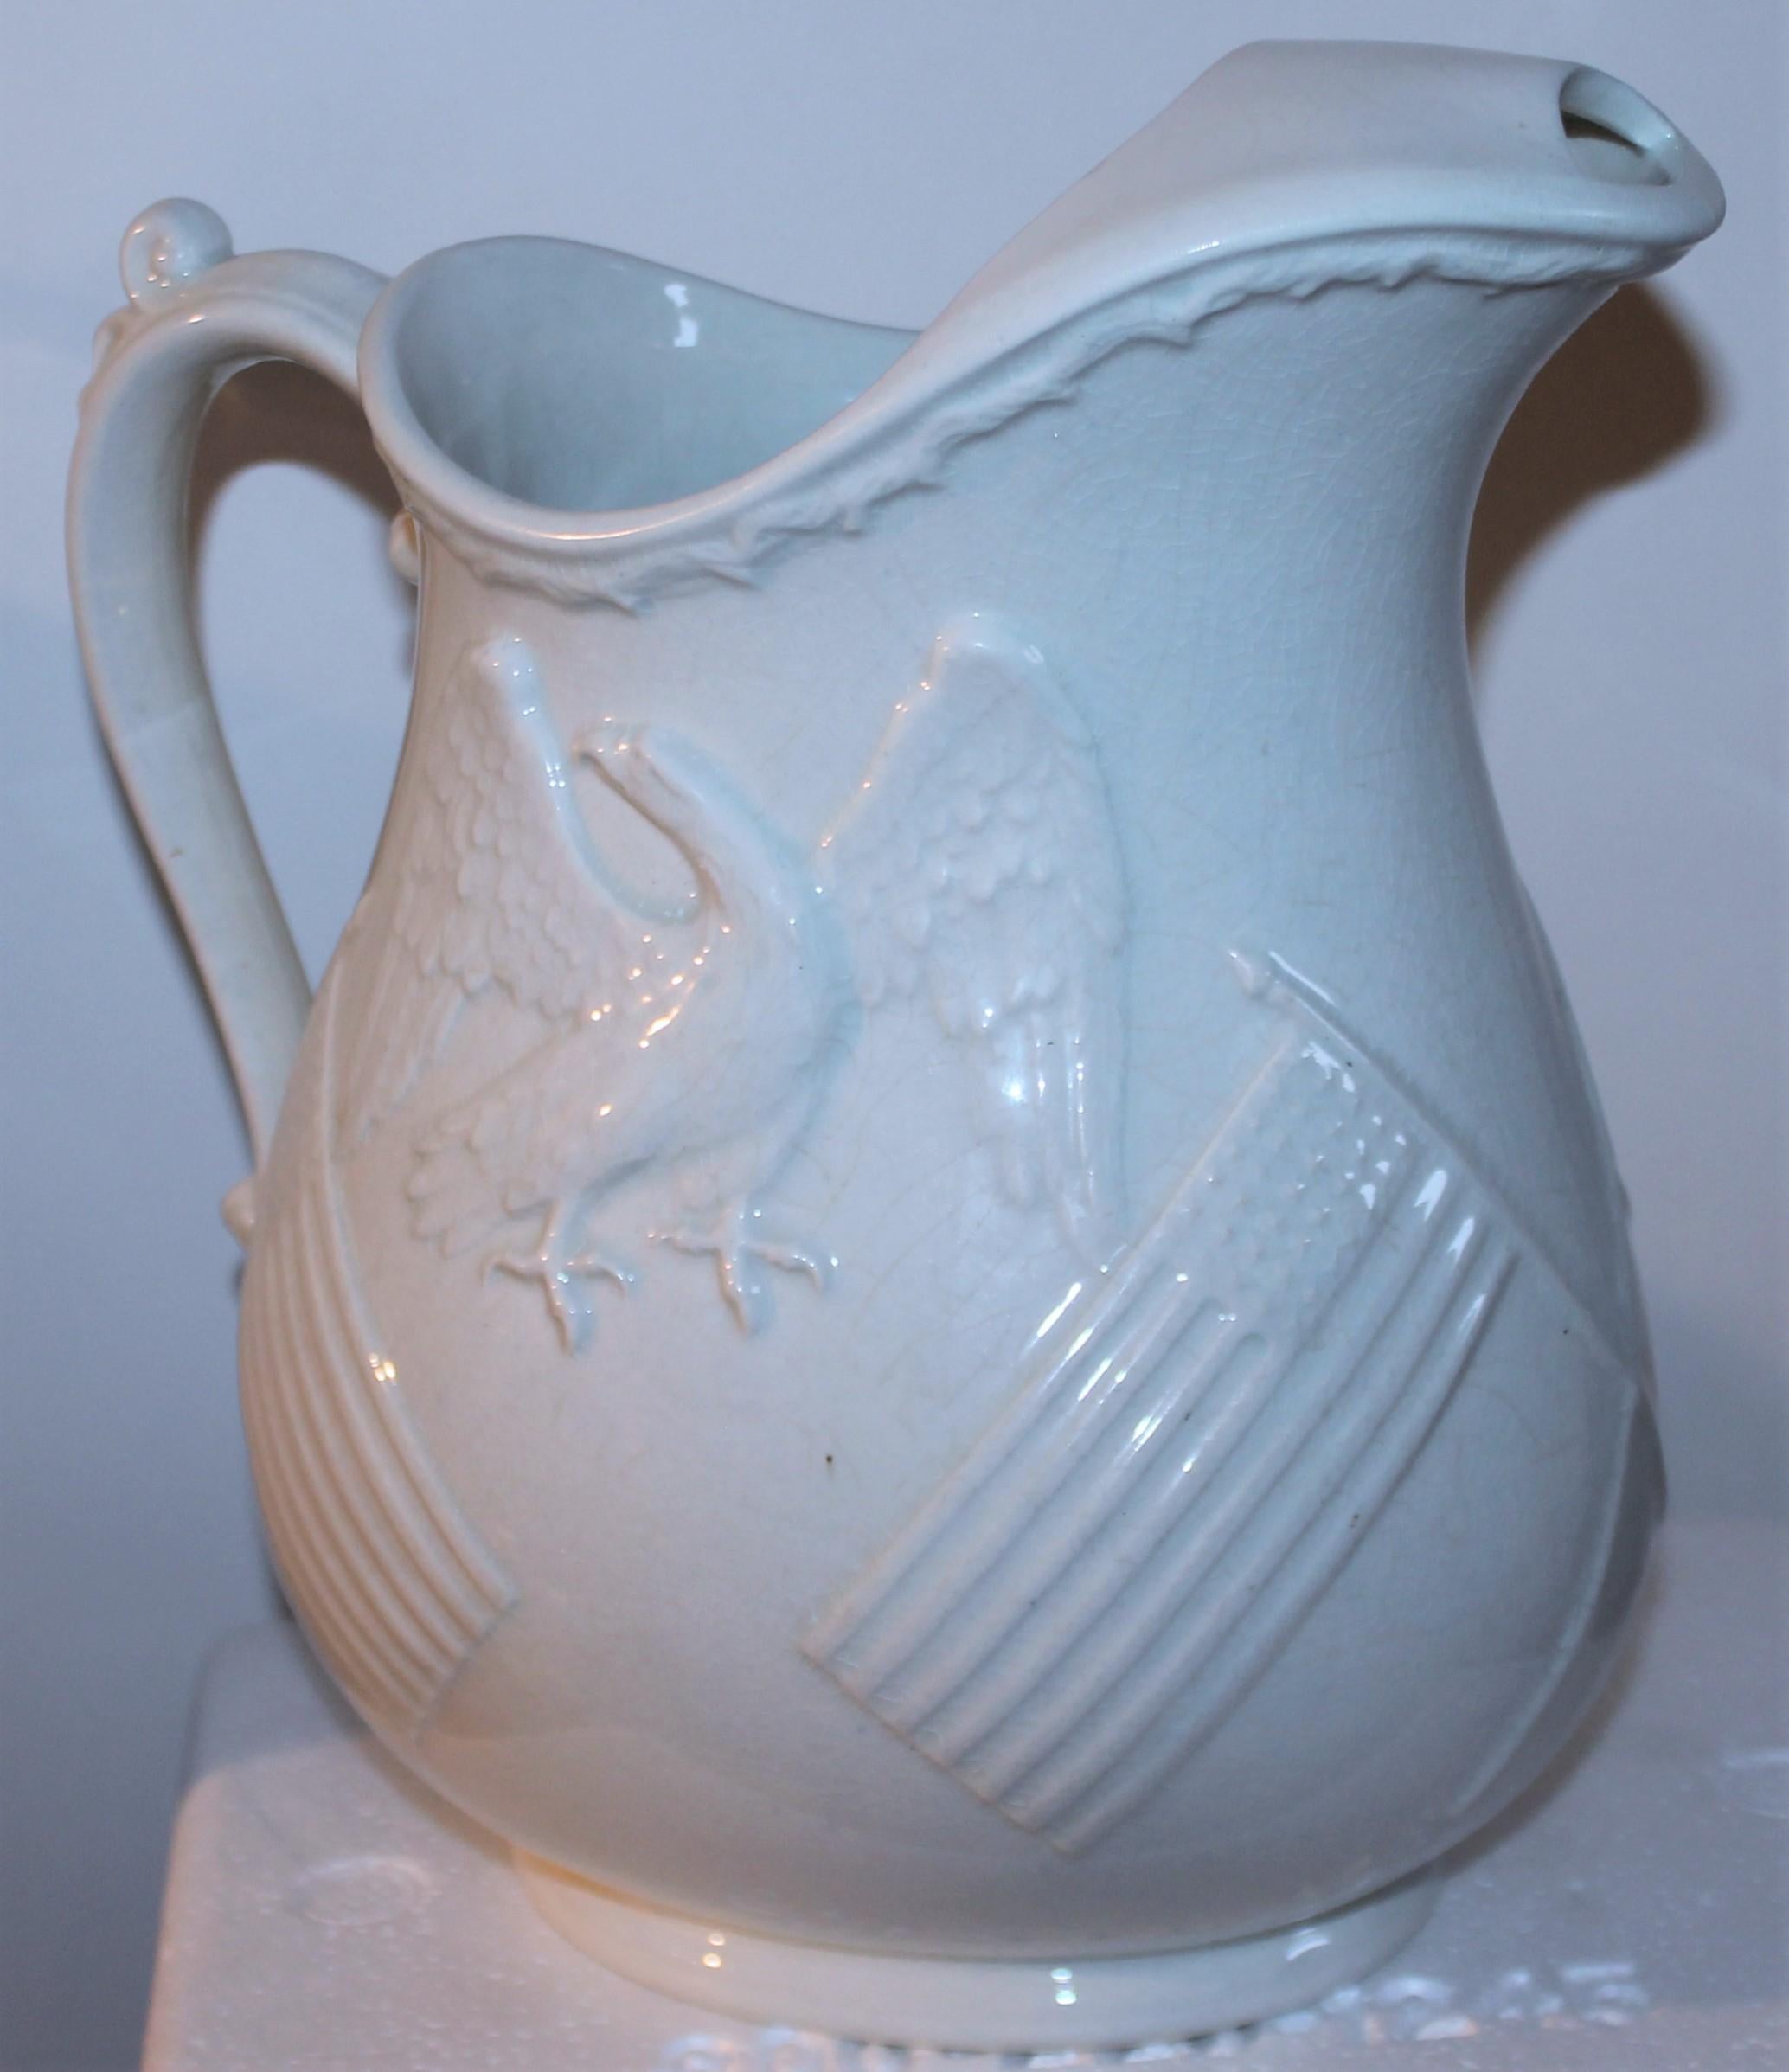 This amazing mid 19thc bright white ironstone water pitcher has embossed American flags & eagle on both sides of the pitcher. This amazing and folky folk art & patriotic pitcher has been prof cleaned too.